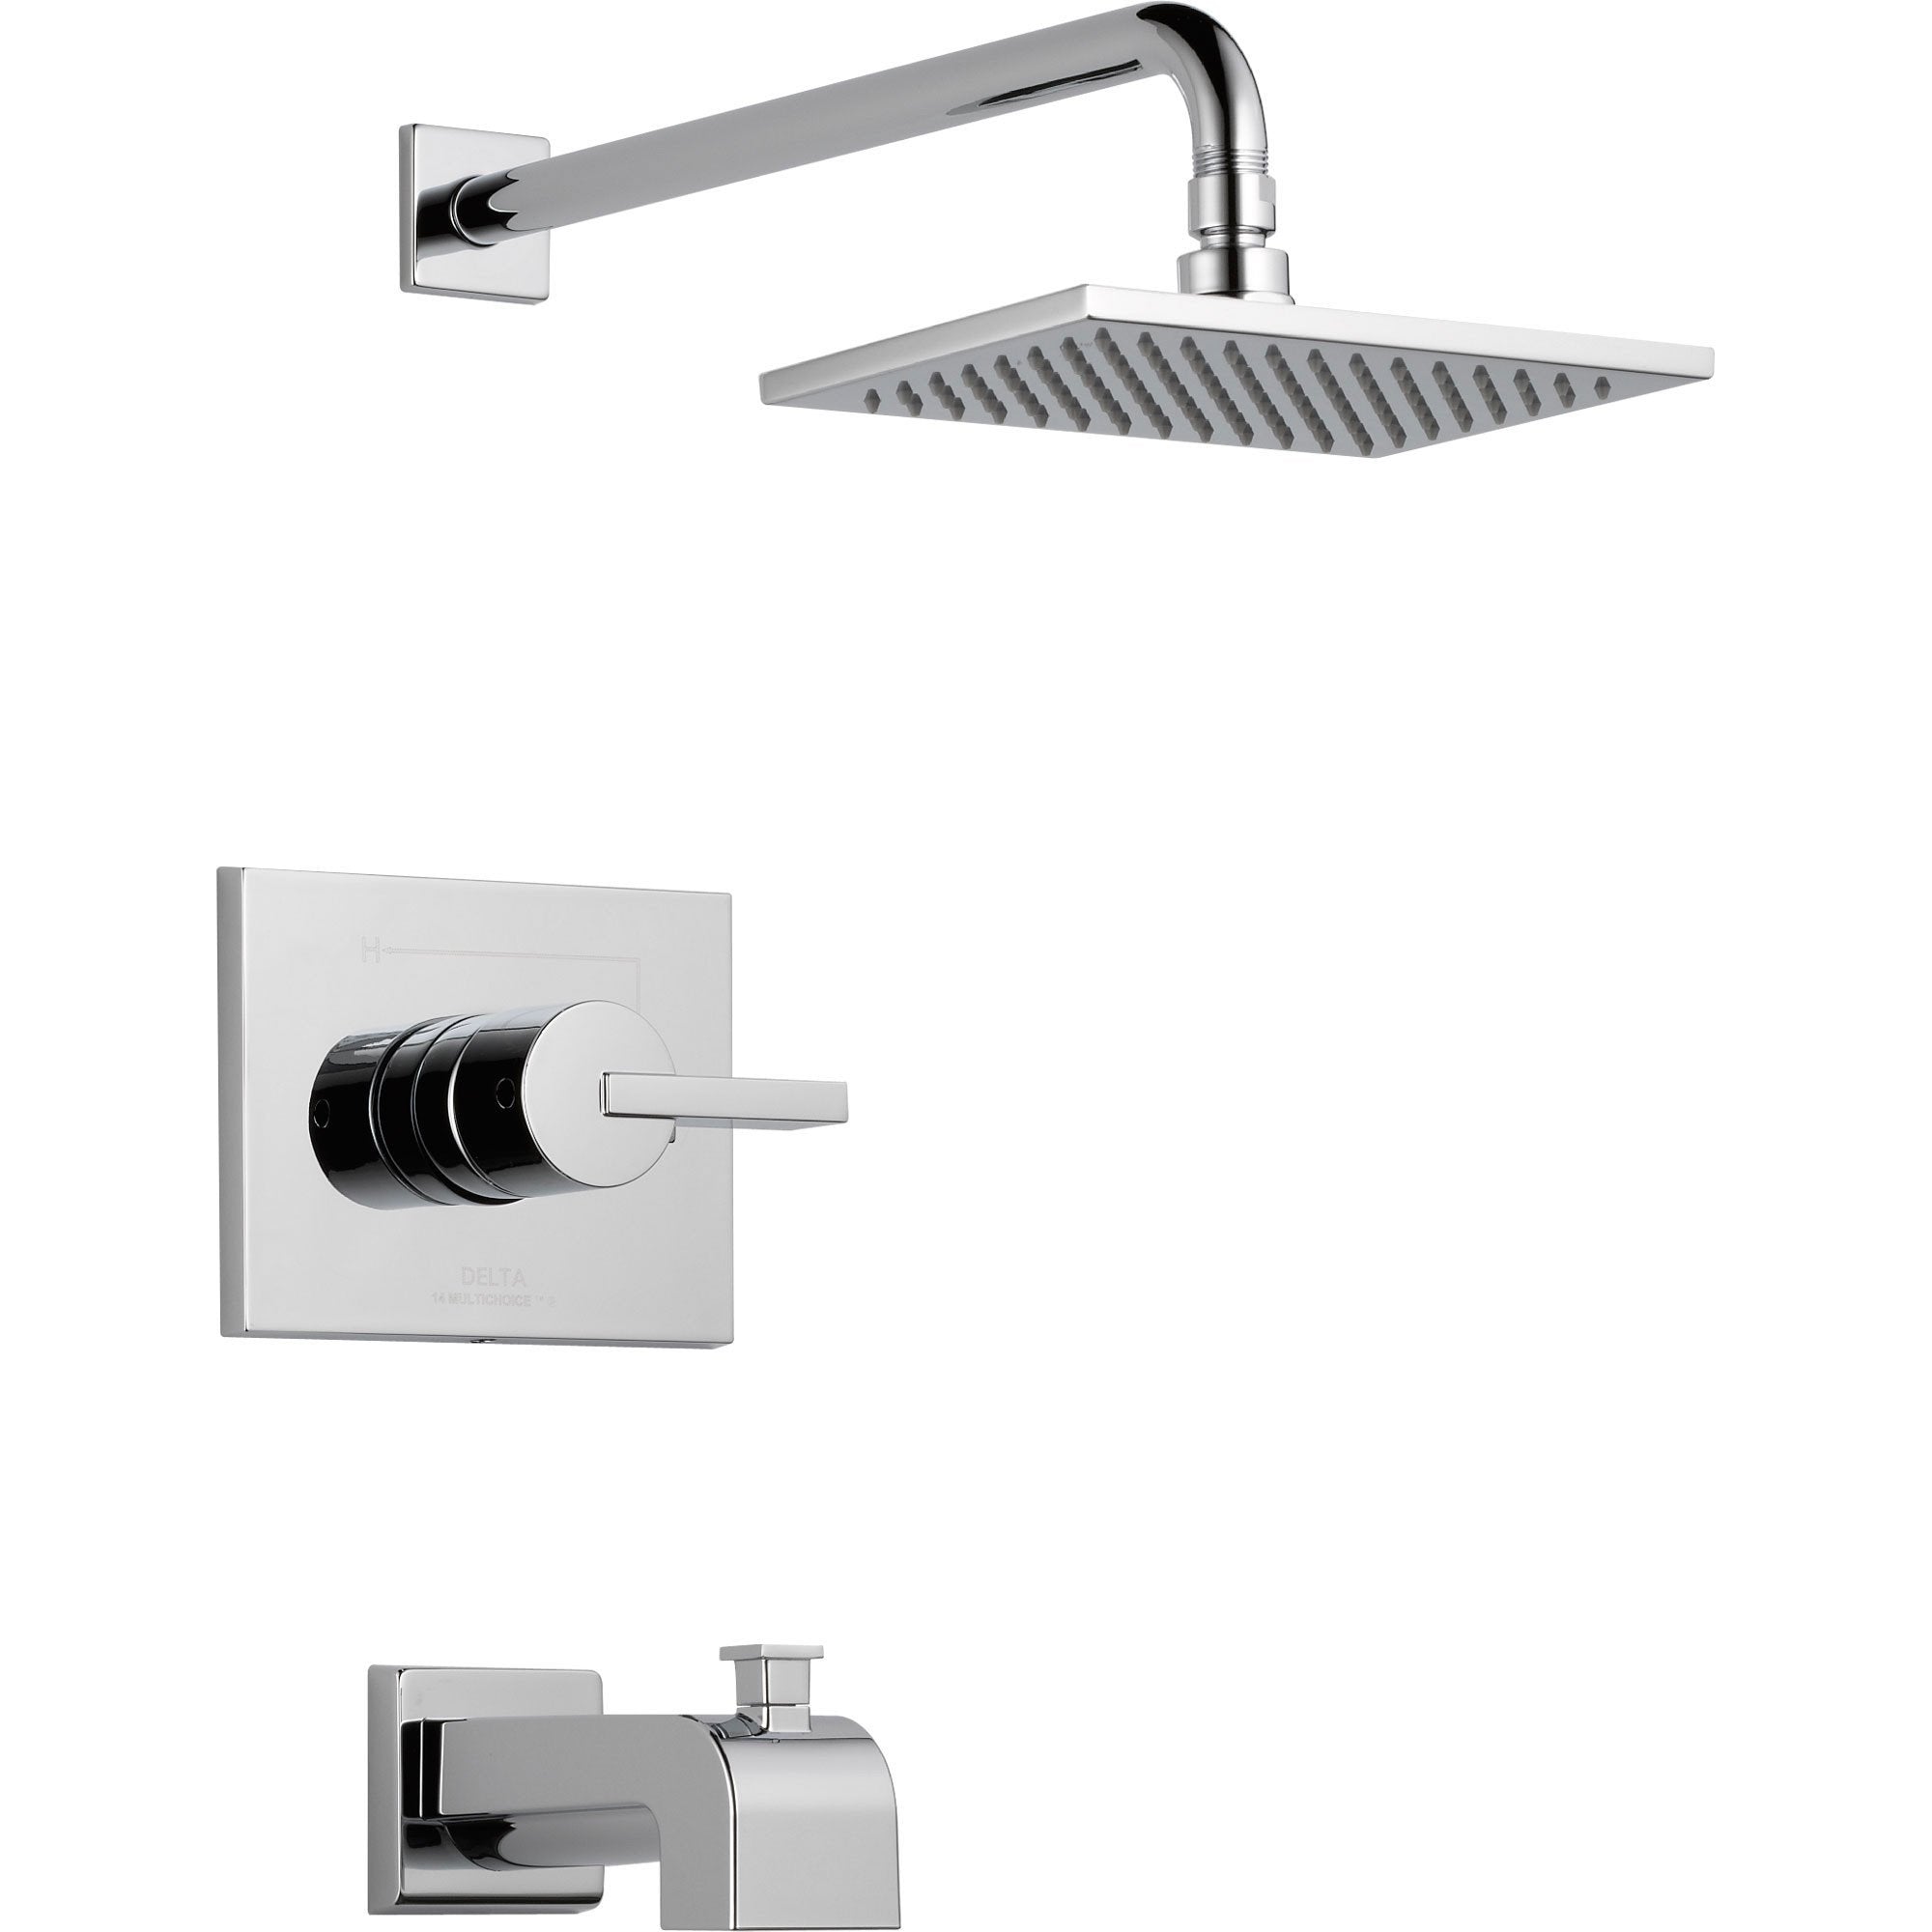 Delta Vero Modern Tub and Shower Combination Faucet with Valve in Chrome D254V